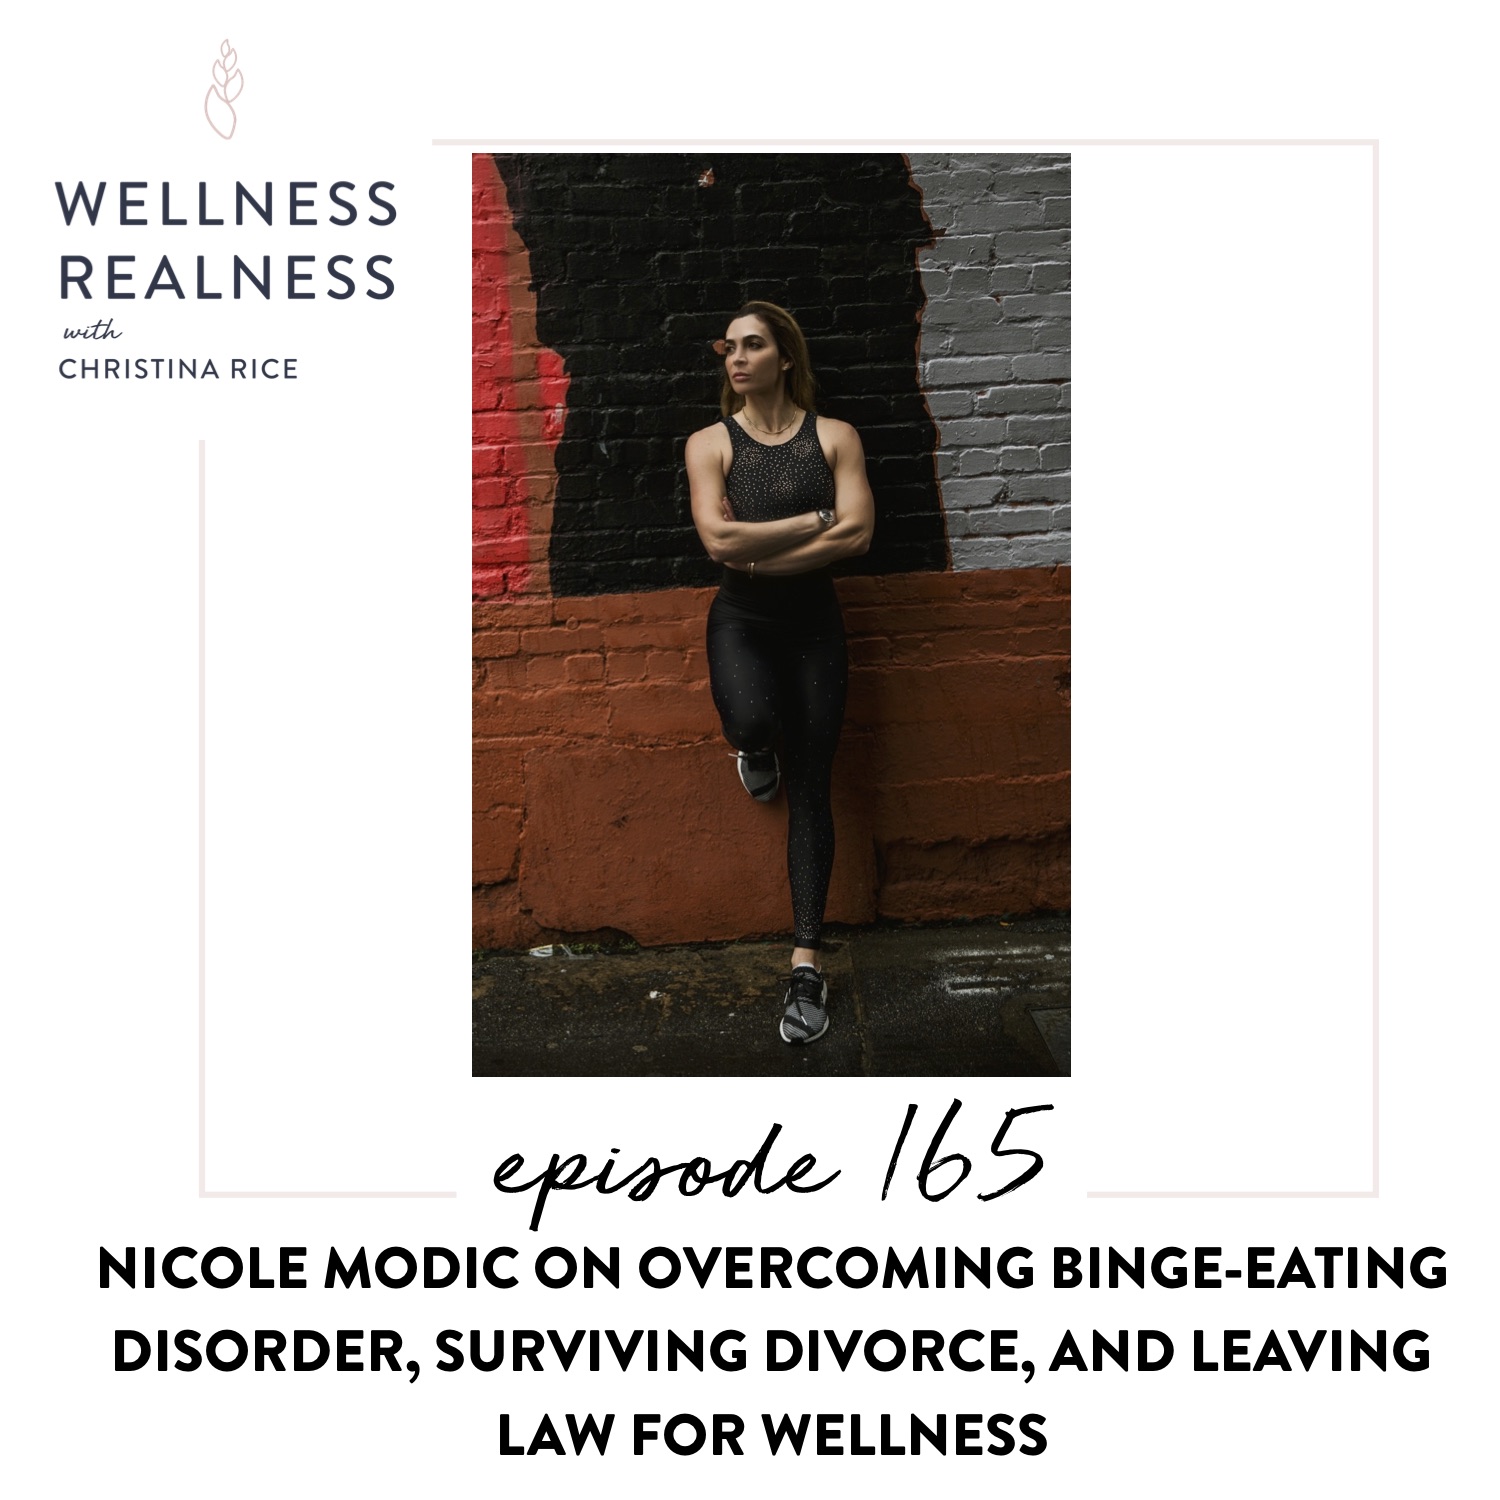 165: Nicole Modic on Overcoming Binge-Eating Disorder, Surviving Divorce, and Leaving Law for Wellness